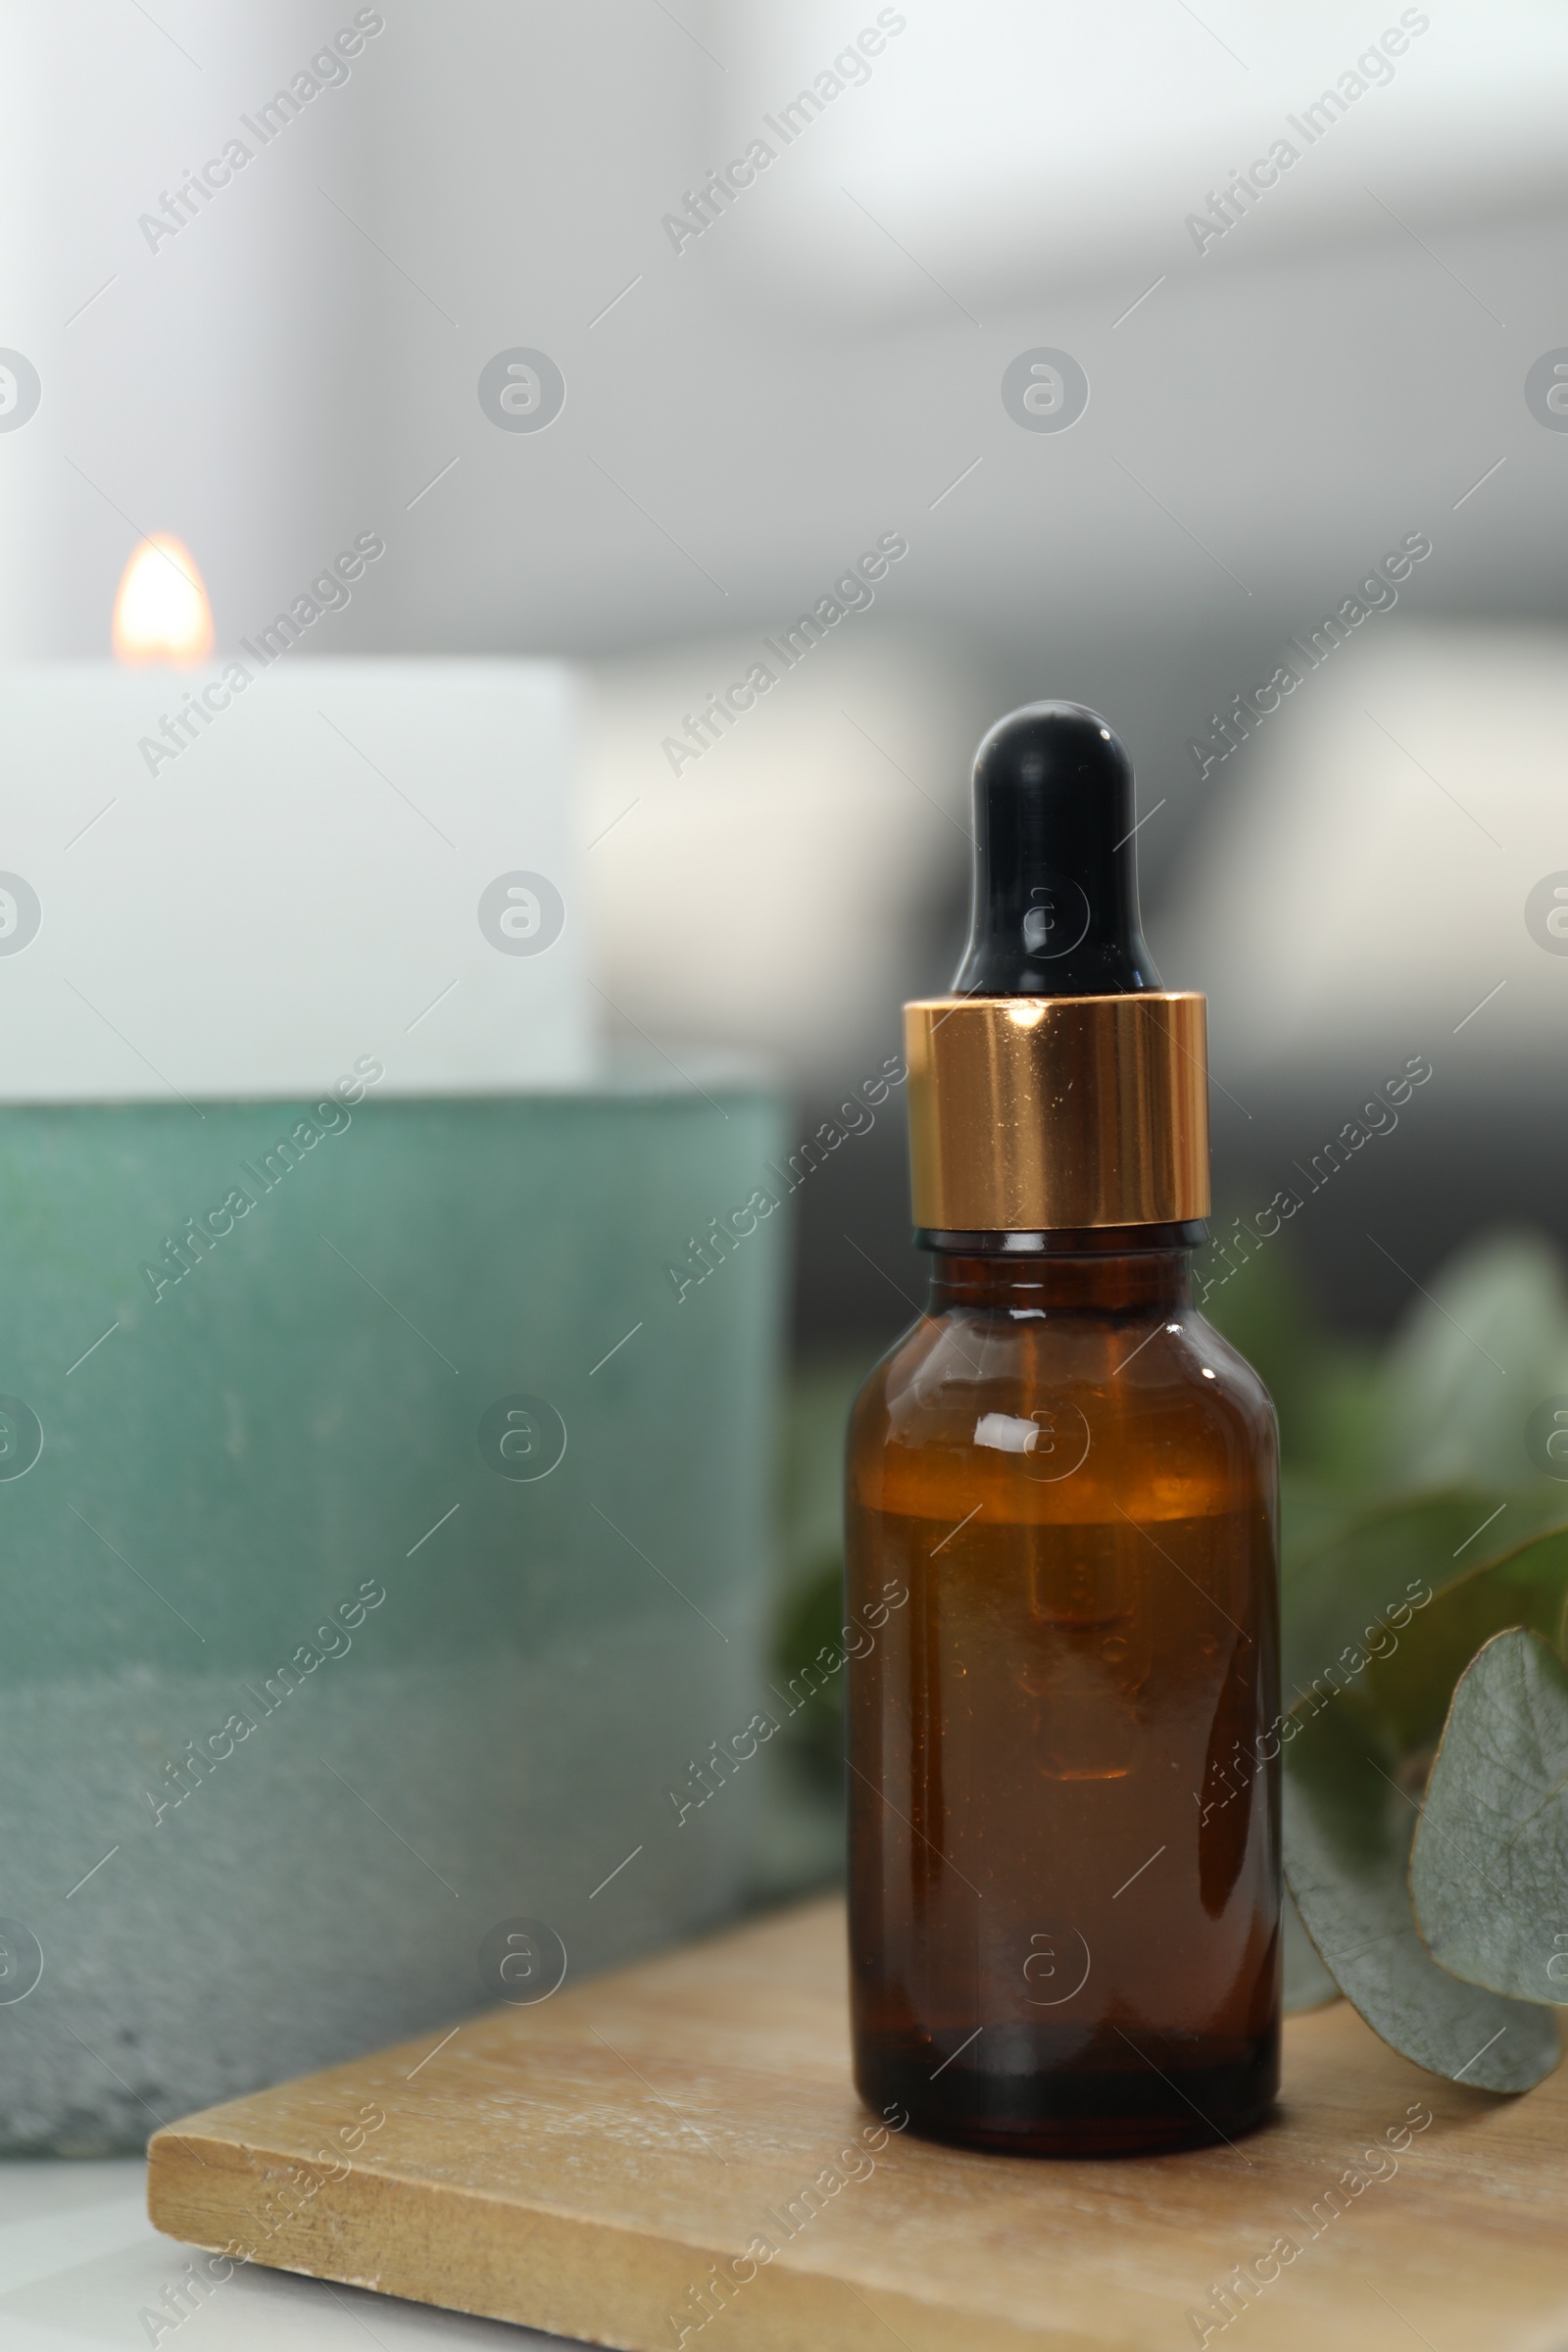 Photo of Aromatherapy. Bottle of essential oil and eucalyptus leaves on table